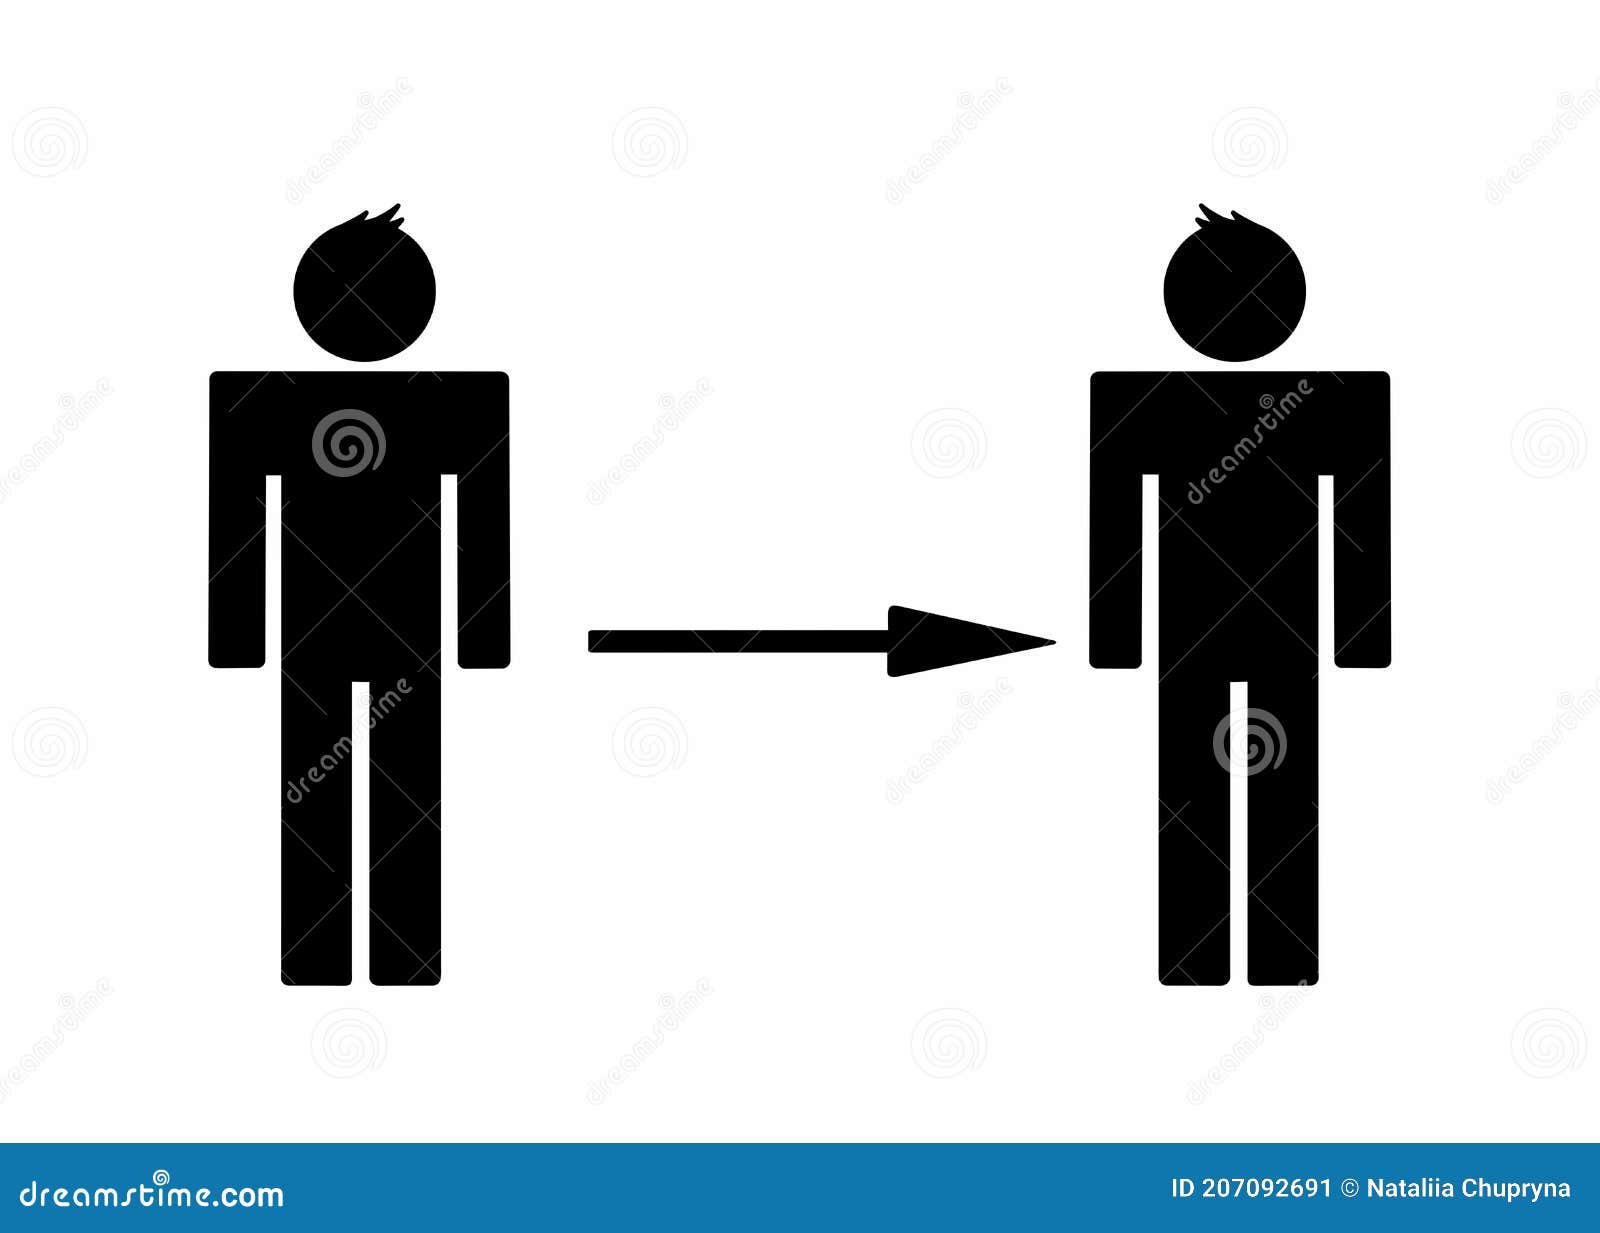 Social Distancing Keep Your Distance.Simple Man or Woman Black and White Silhouettes.Same Sex Love.love Bettwen Man and Women Stock Illustration picture